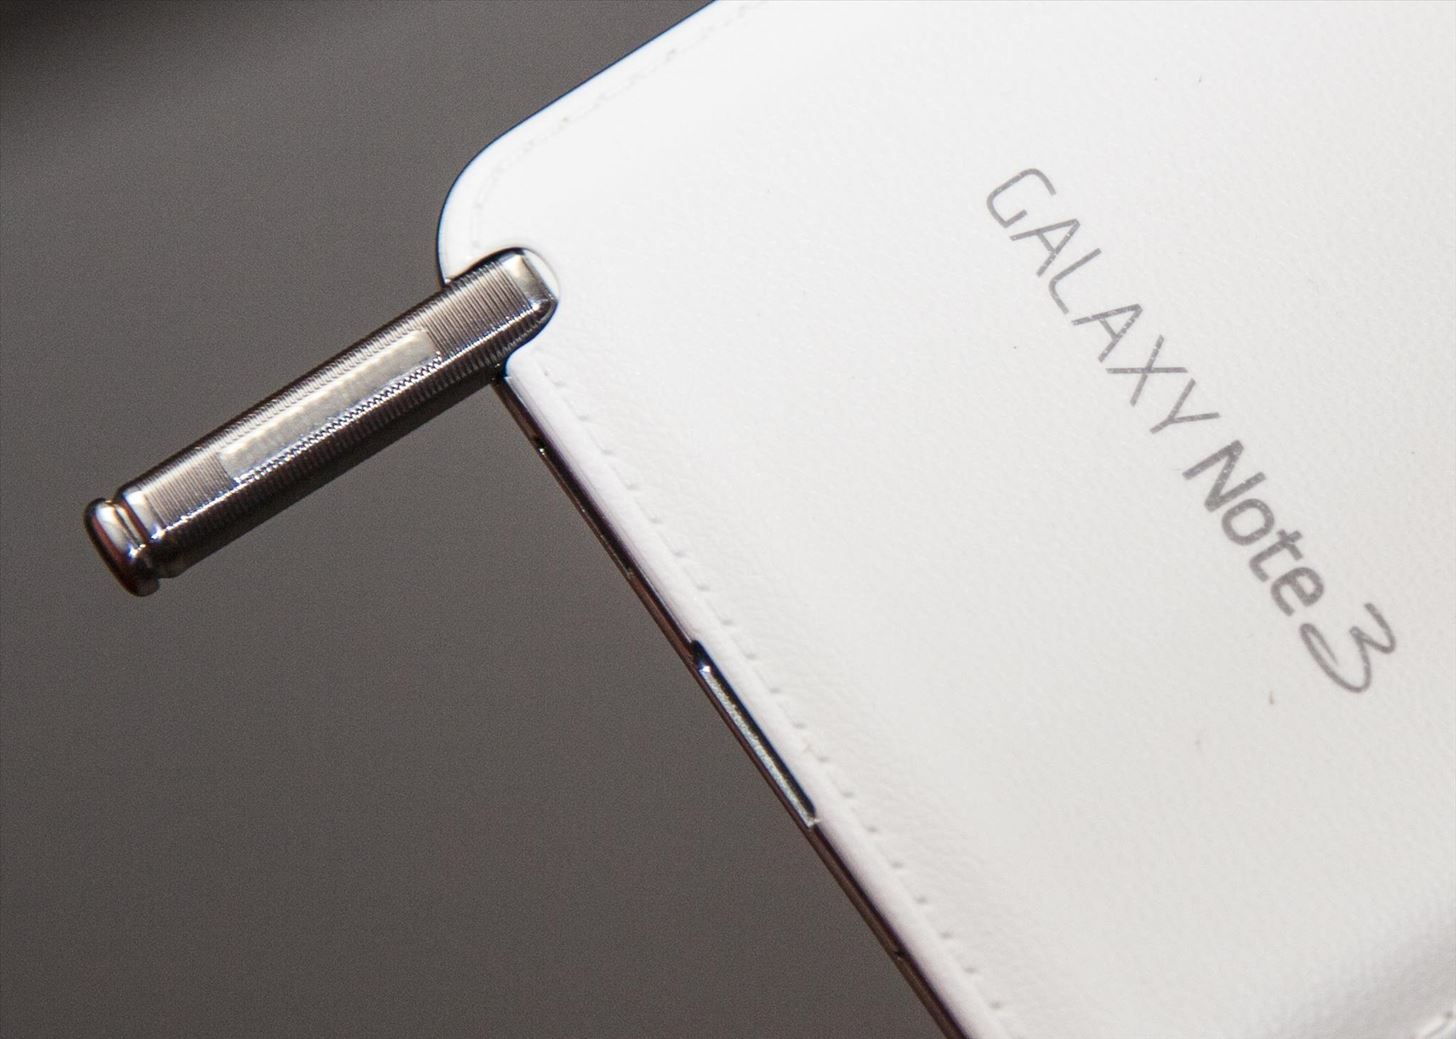 A softModder's Review of the Samsung Galaxy Note 3: "Way Better Than the Note 2"